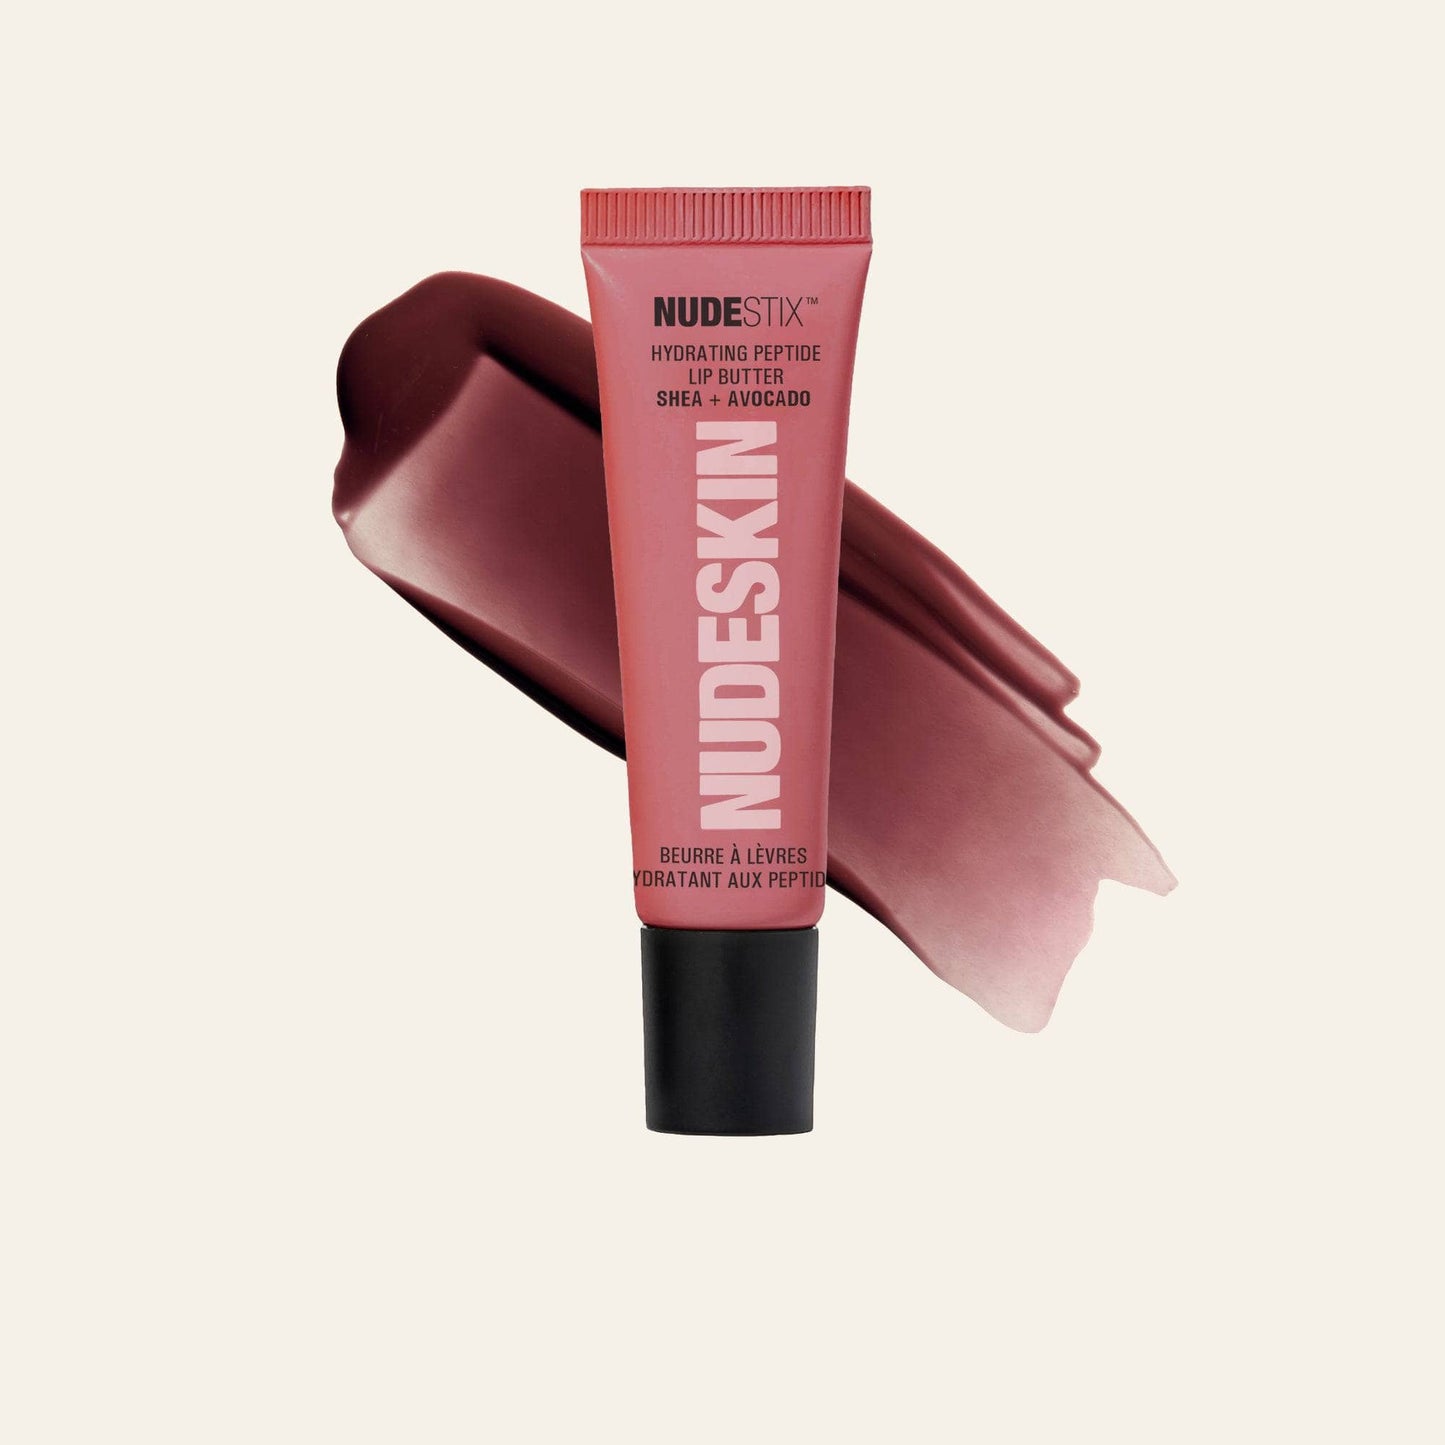 Hydrating Peptide Lip Butter in shade Sugar Plum with texture swatch